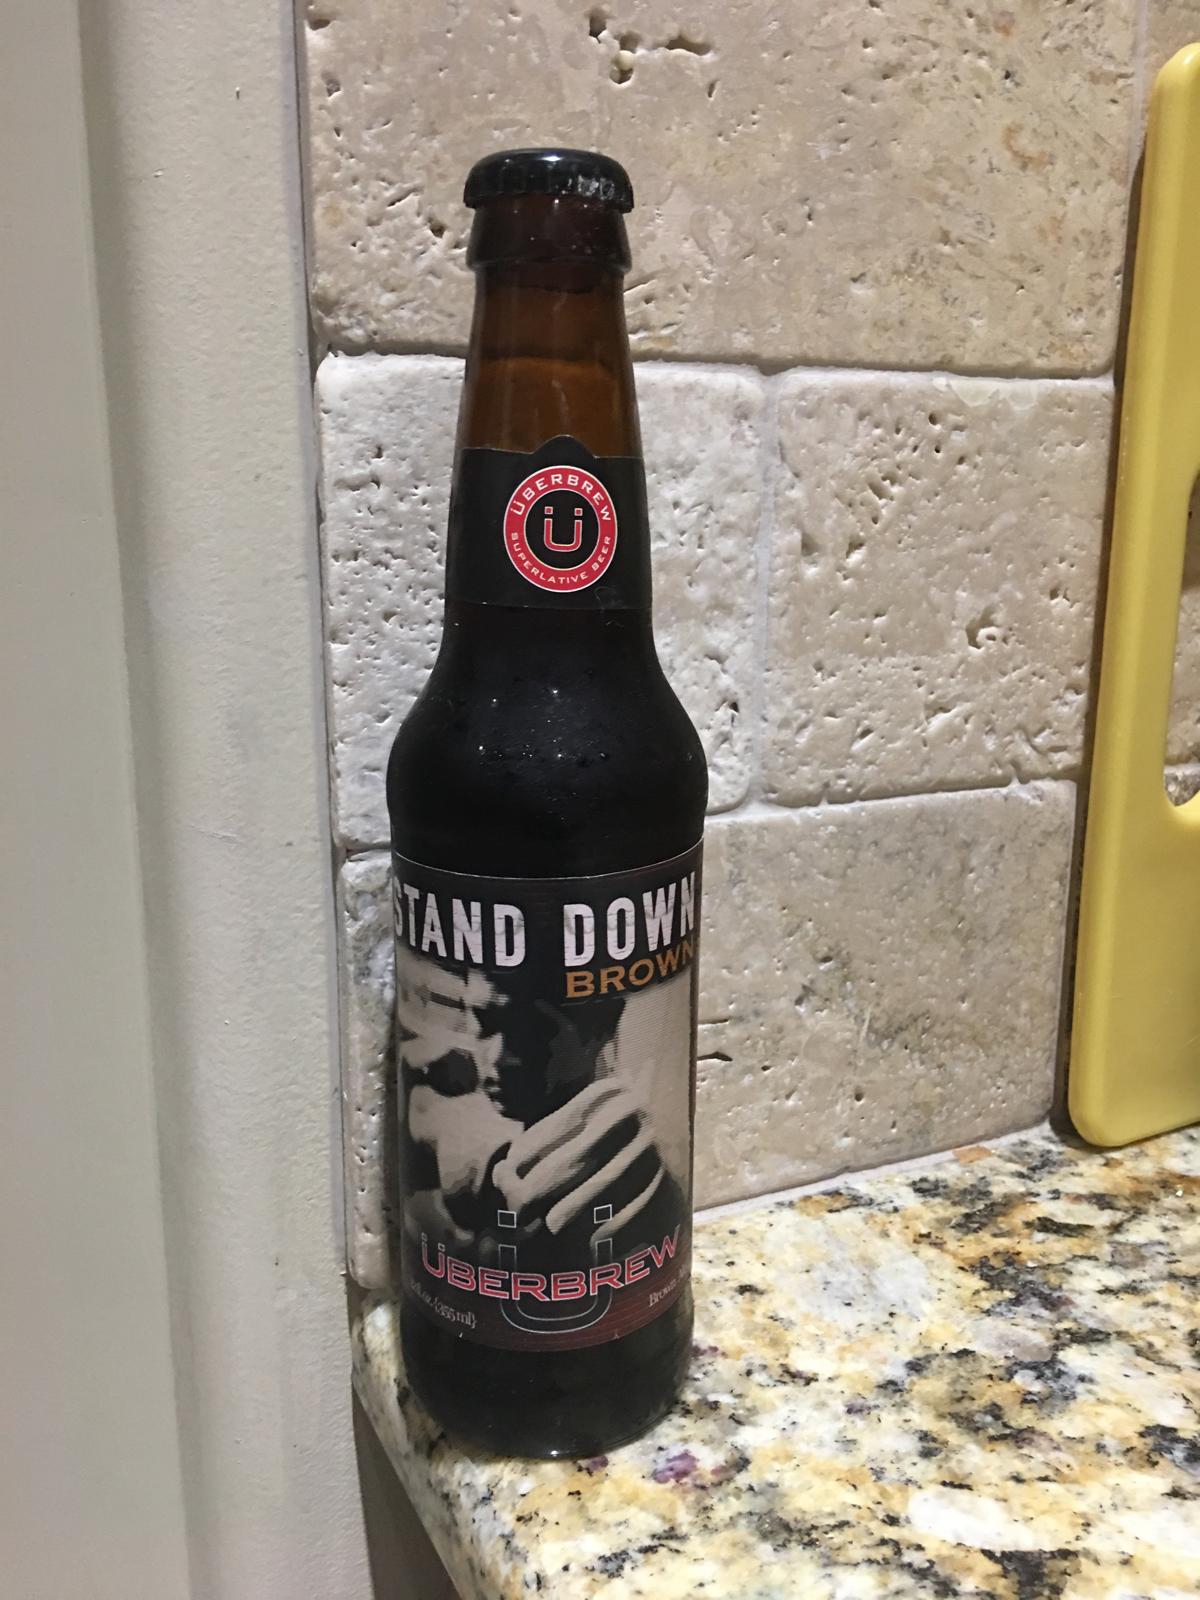 Stand Down Brown